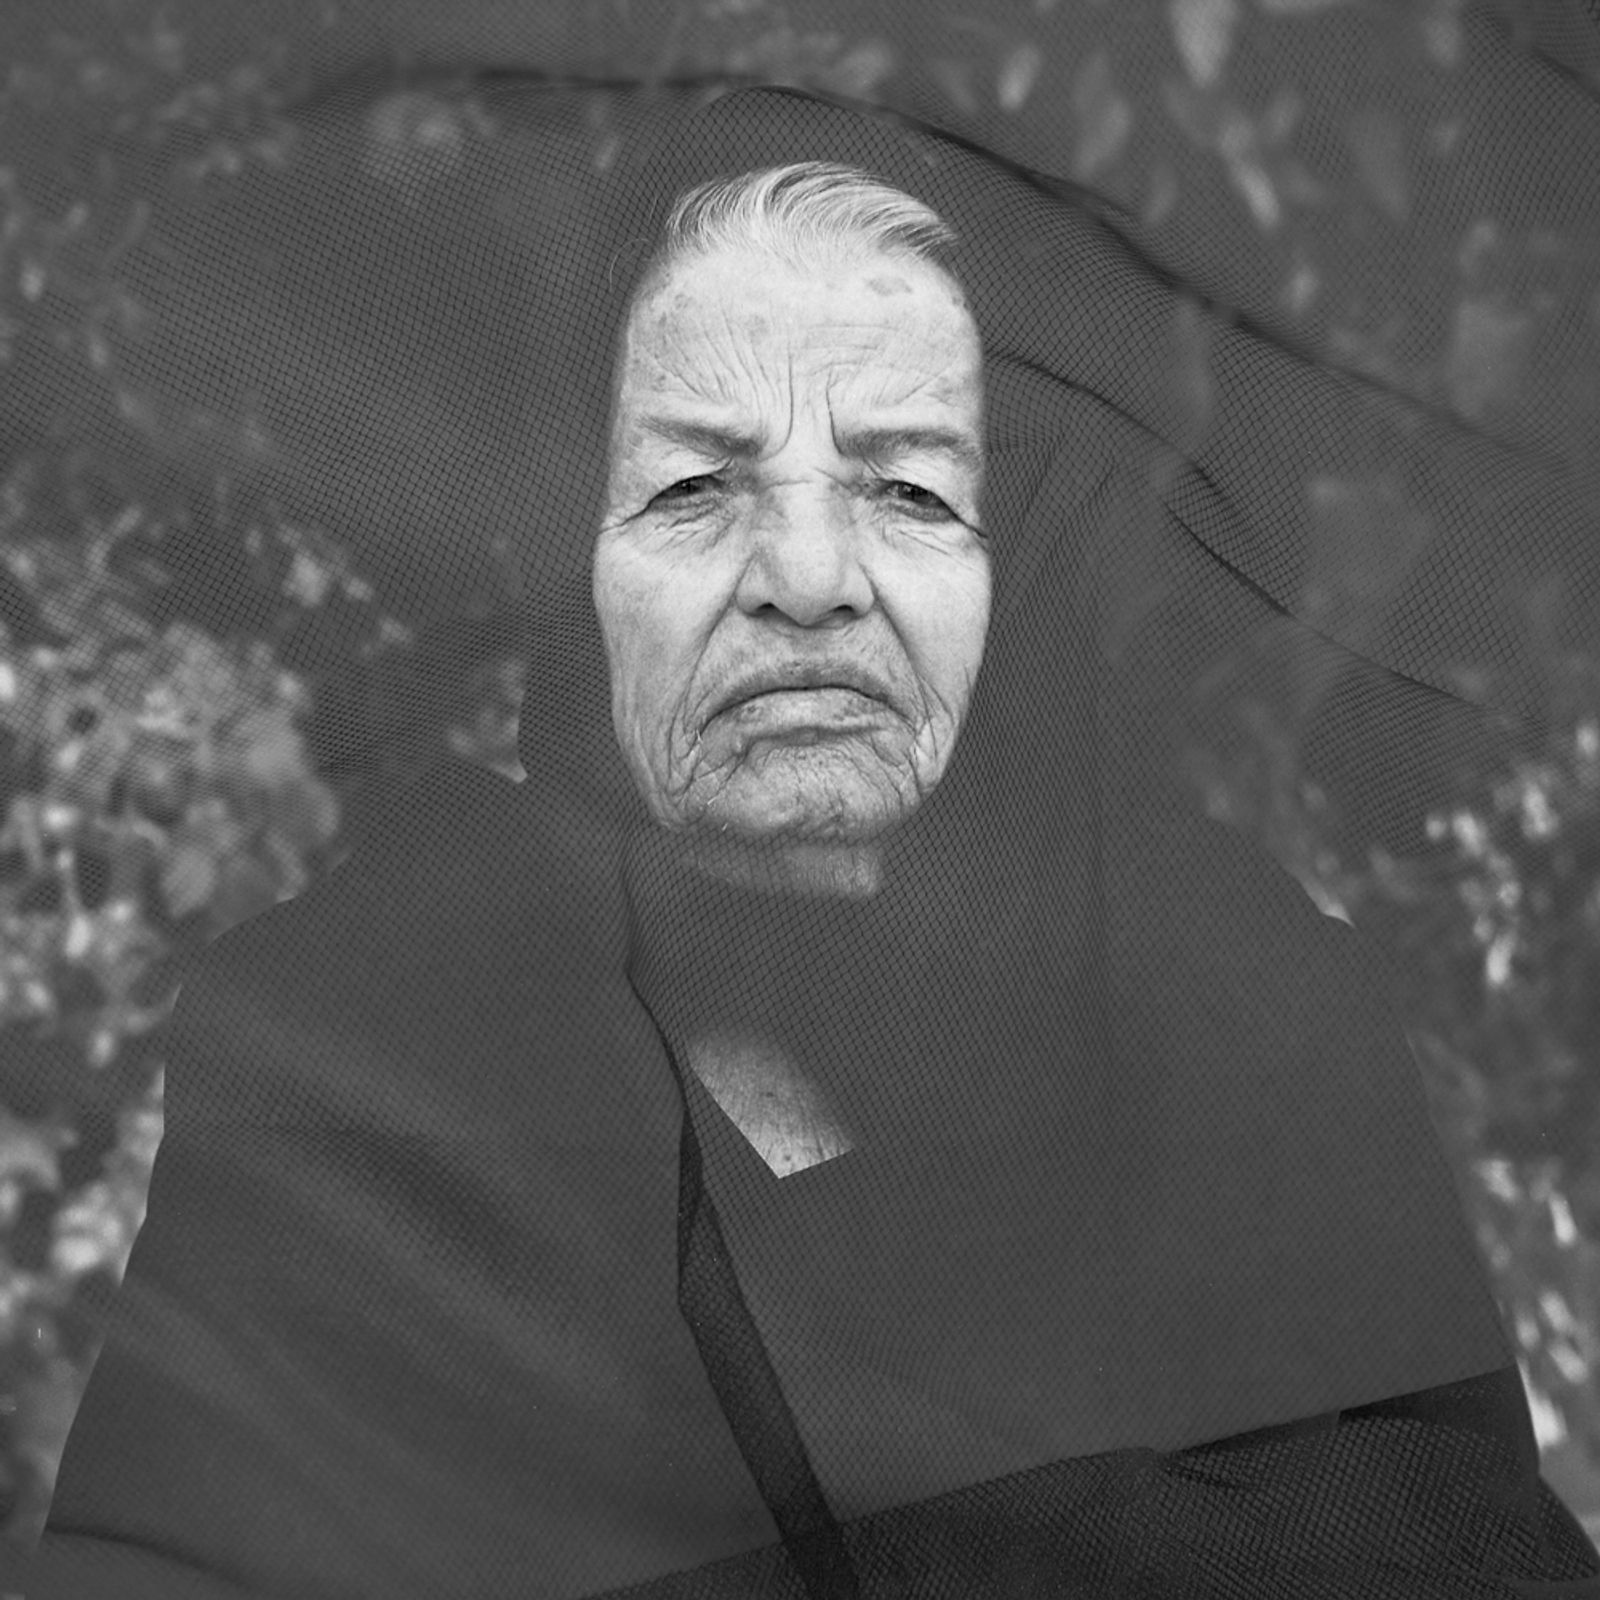 © Ioanna Sakellaraki - Image from the The Truth is in the Soil photography project